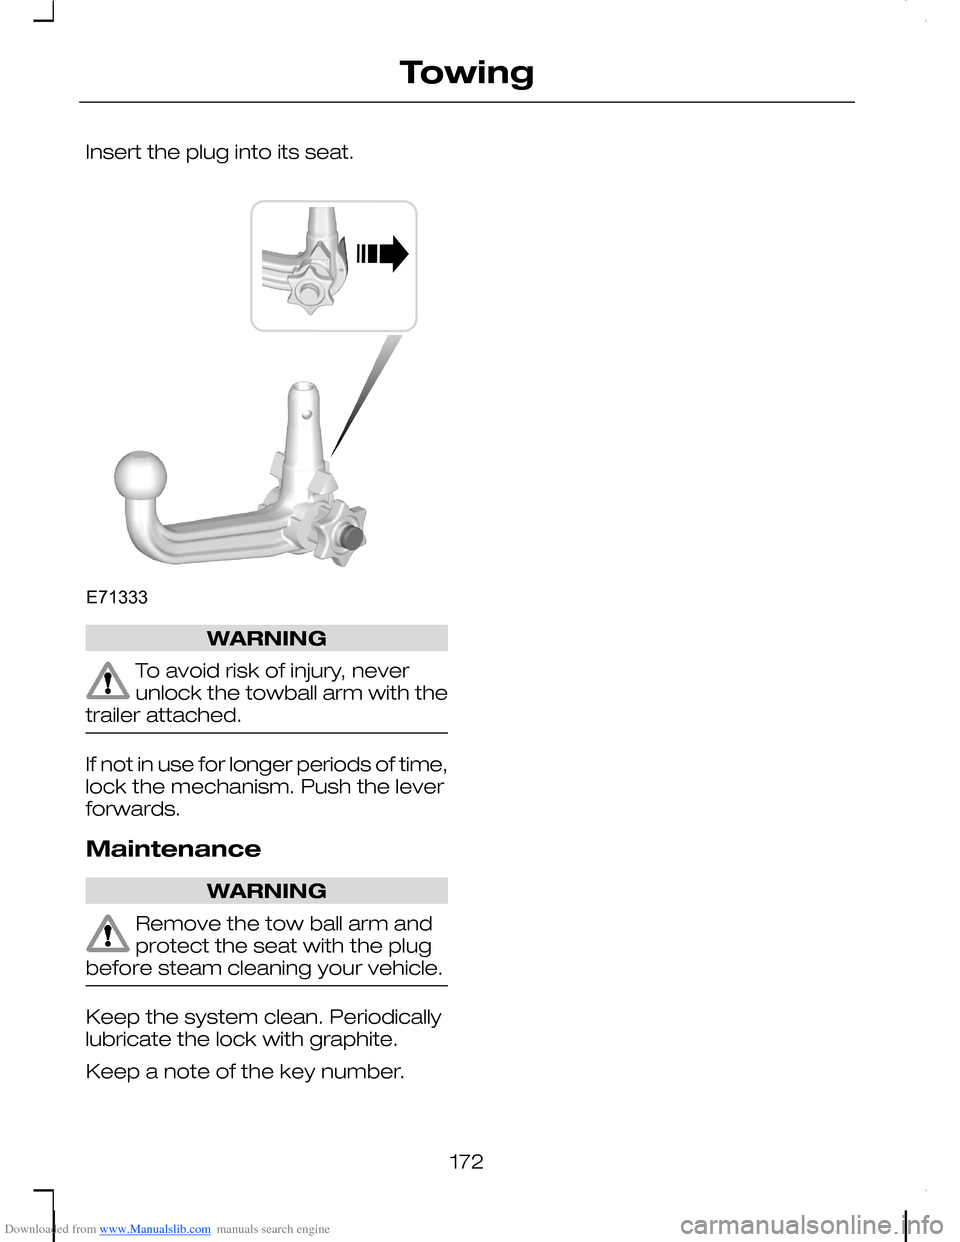 FORD C MAX 2008 1.G Owners Manual Downloaded from www.Manualslib.com manuals search engine Insert the plug into its seat.
WARNING
To avoid risk of injury, neverunlock the towball arm with thetrailer attached.
If not in use for longer 